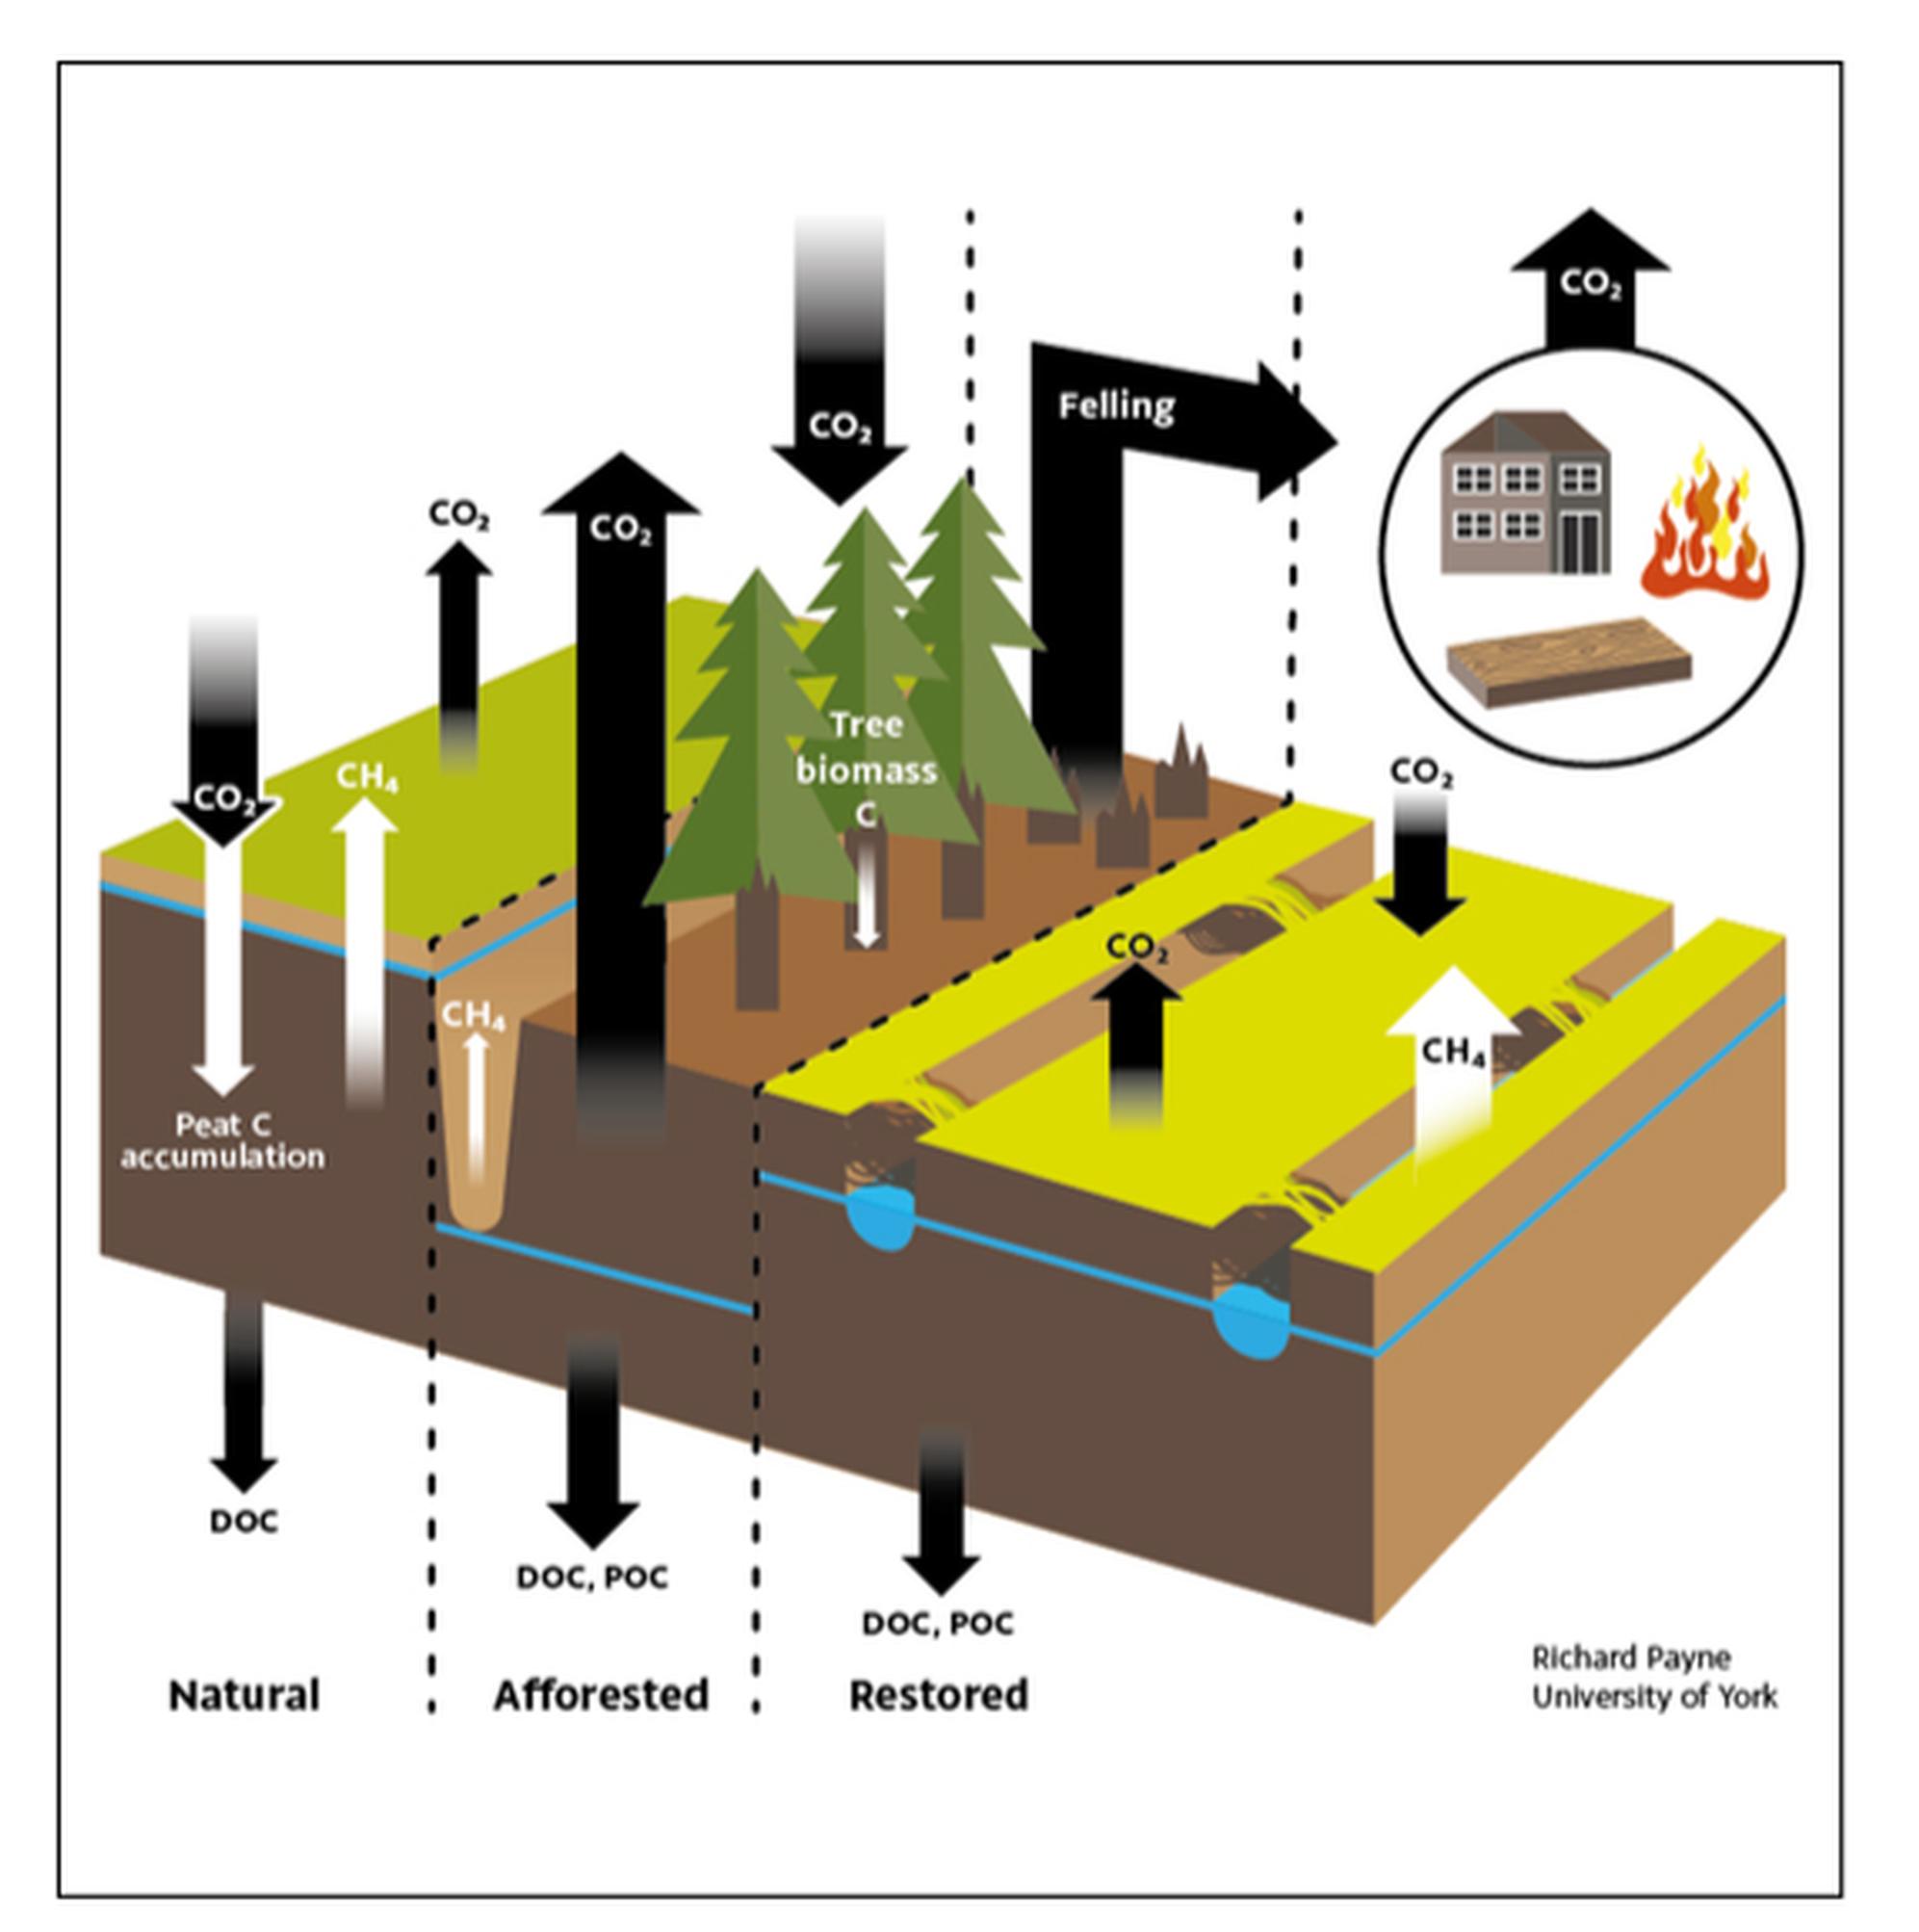 Conceptual diagram of key carbon cycle pathways and changes with peatland afforestation and restoration (Payne & Jessop 2018)